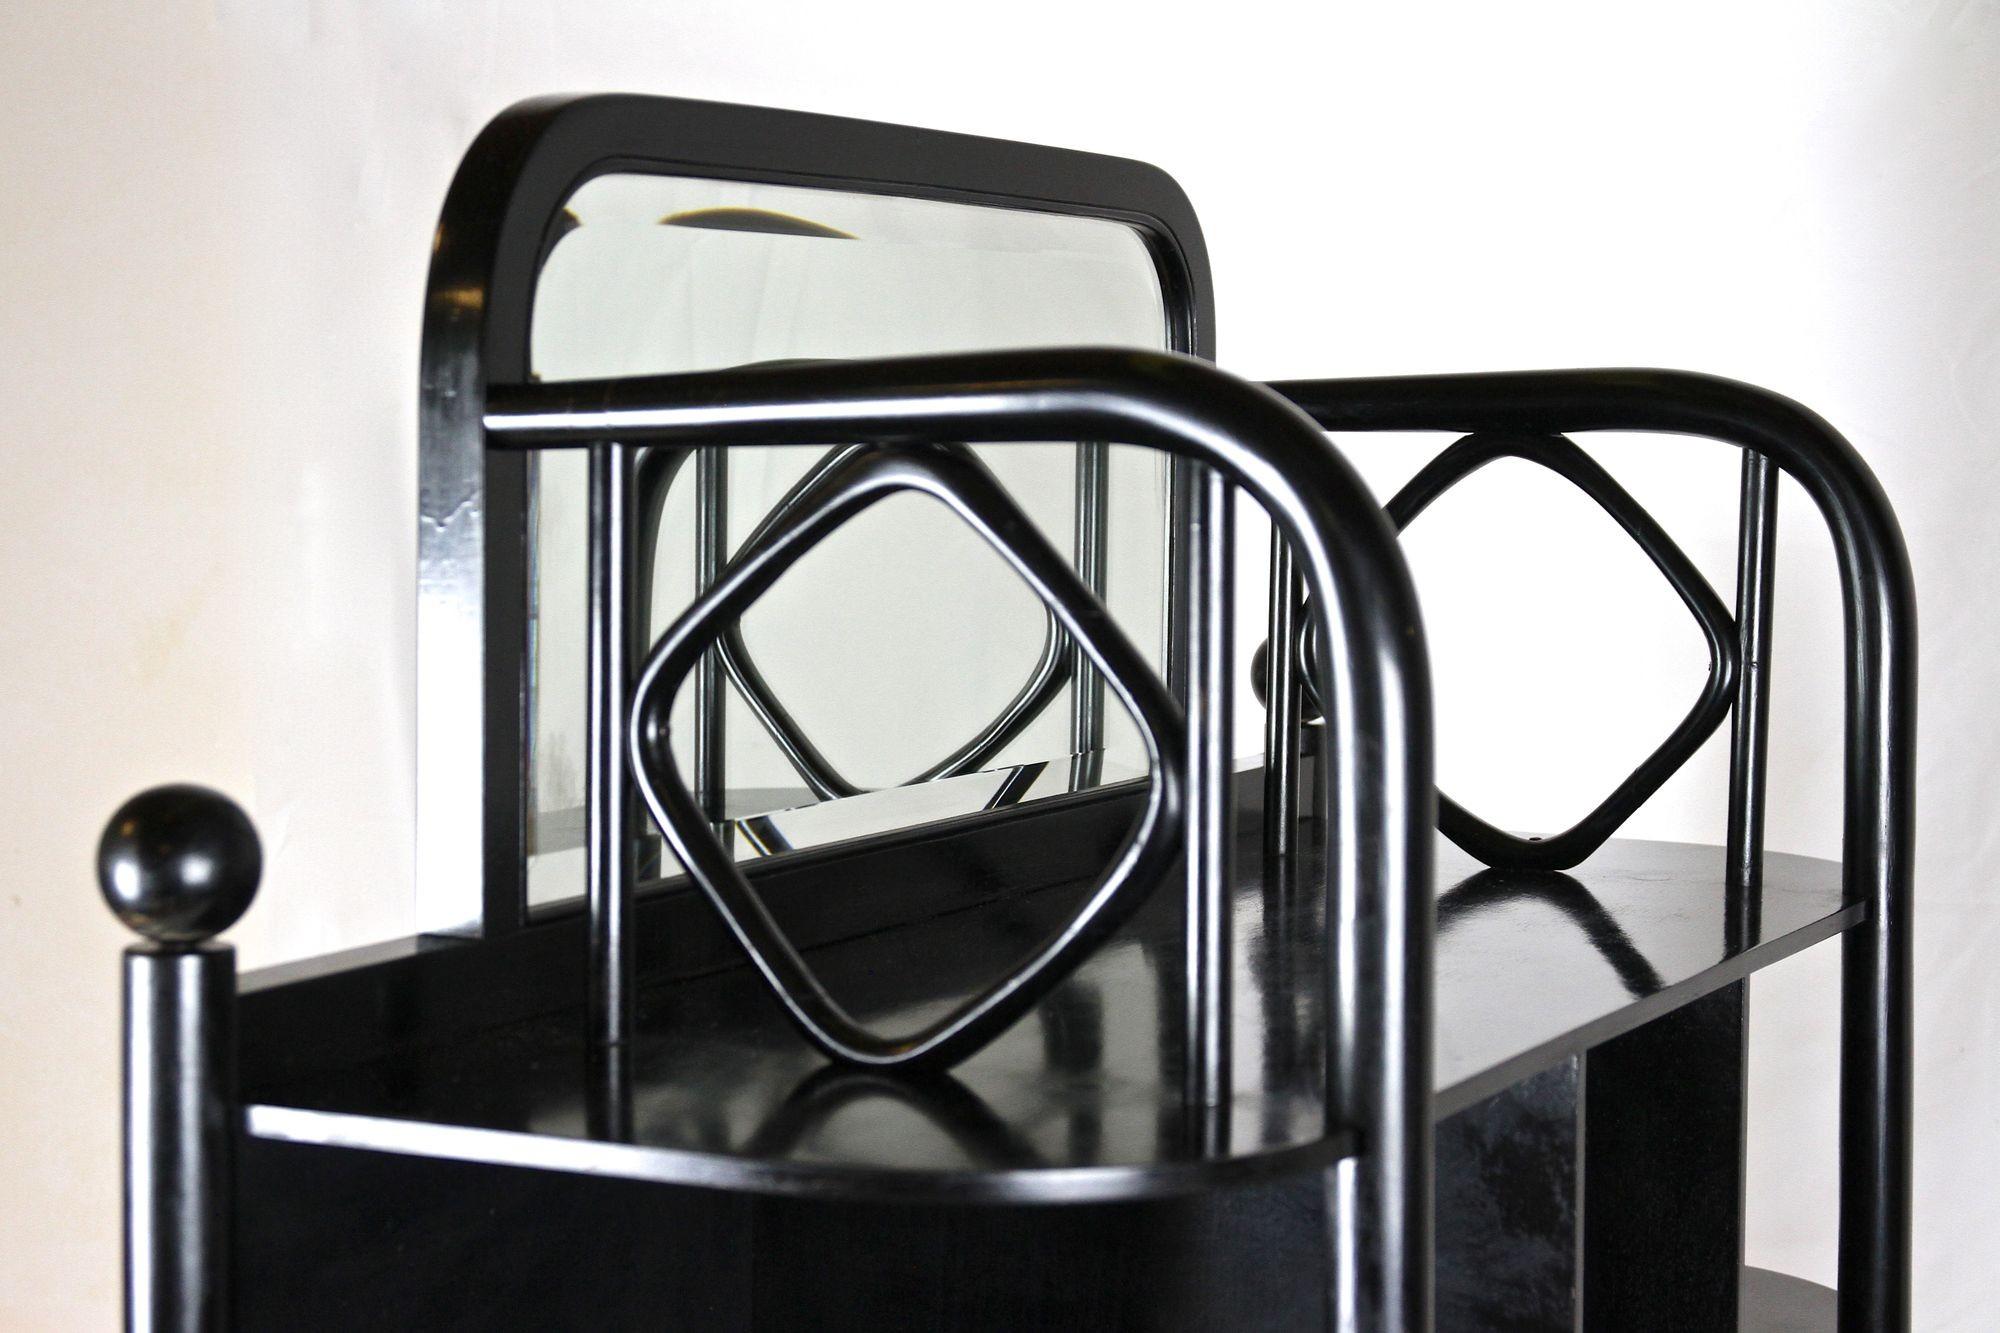 Black Art Nouveau Display Cabinet by Josef Hoffmann for Thonet, AT ca. 1905 For Sale 9